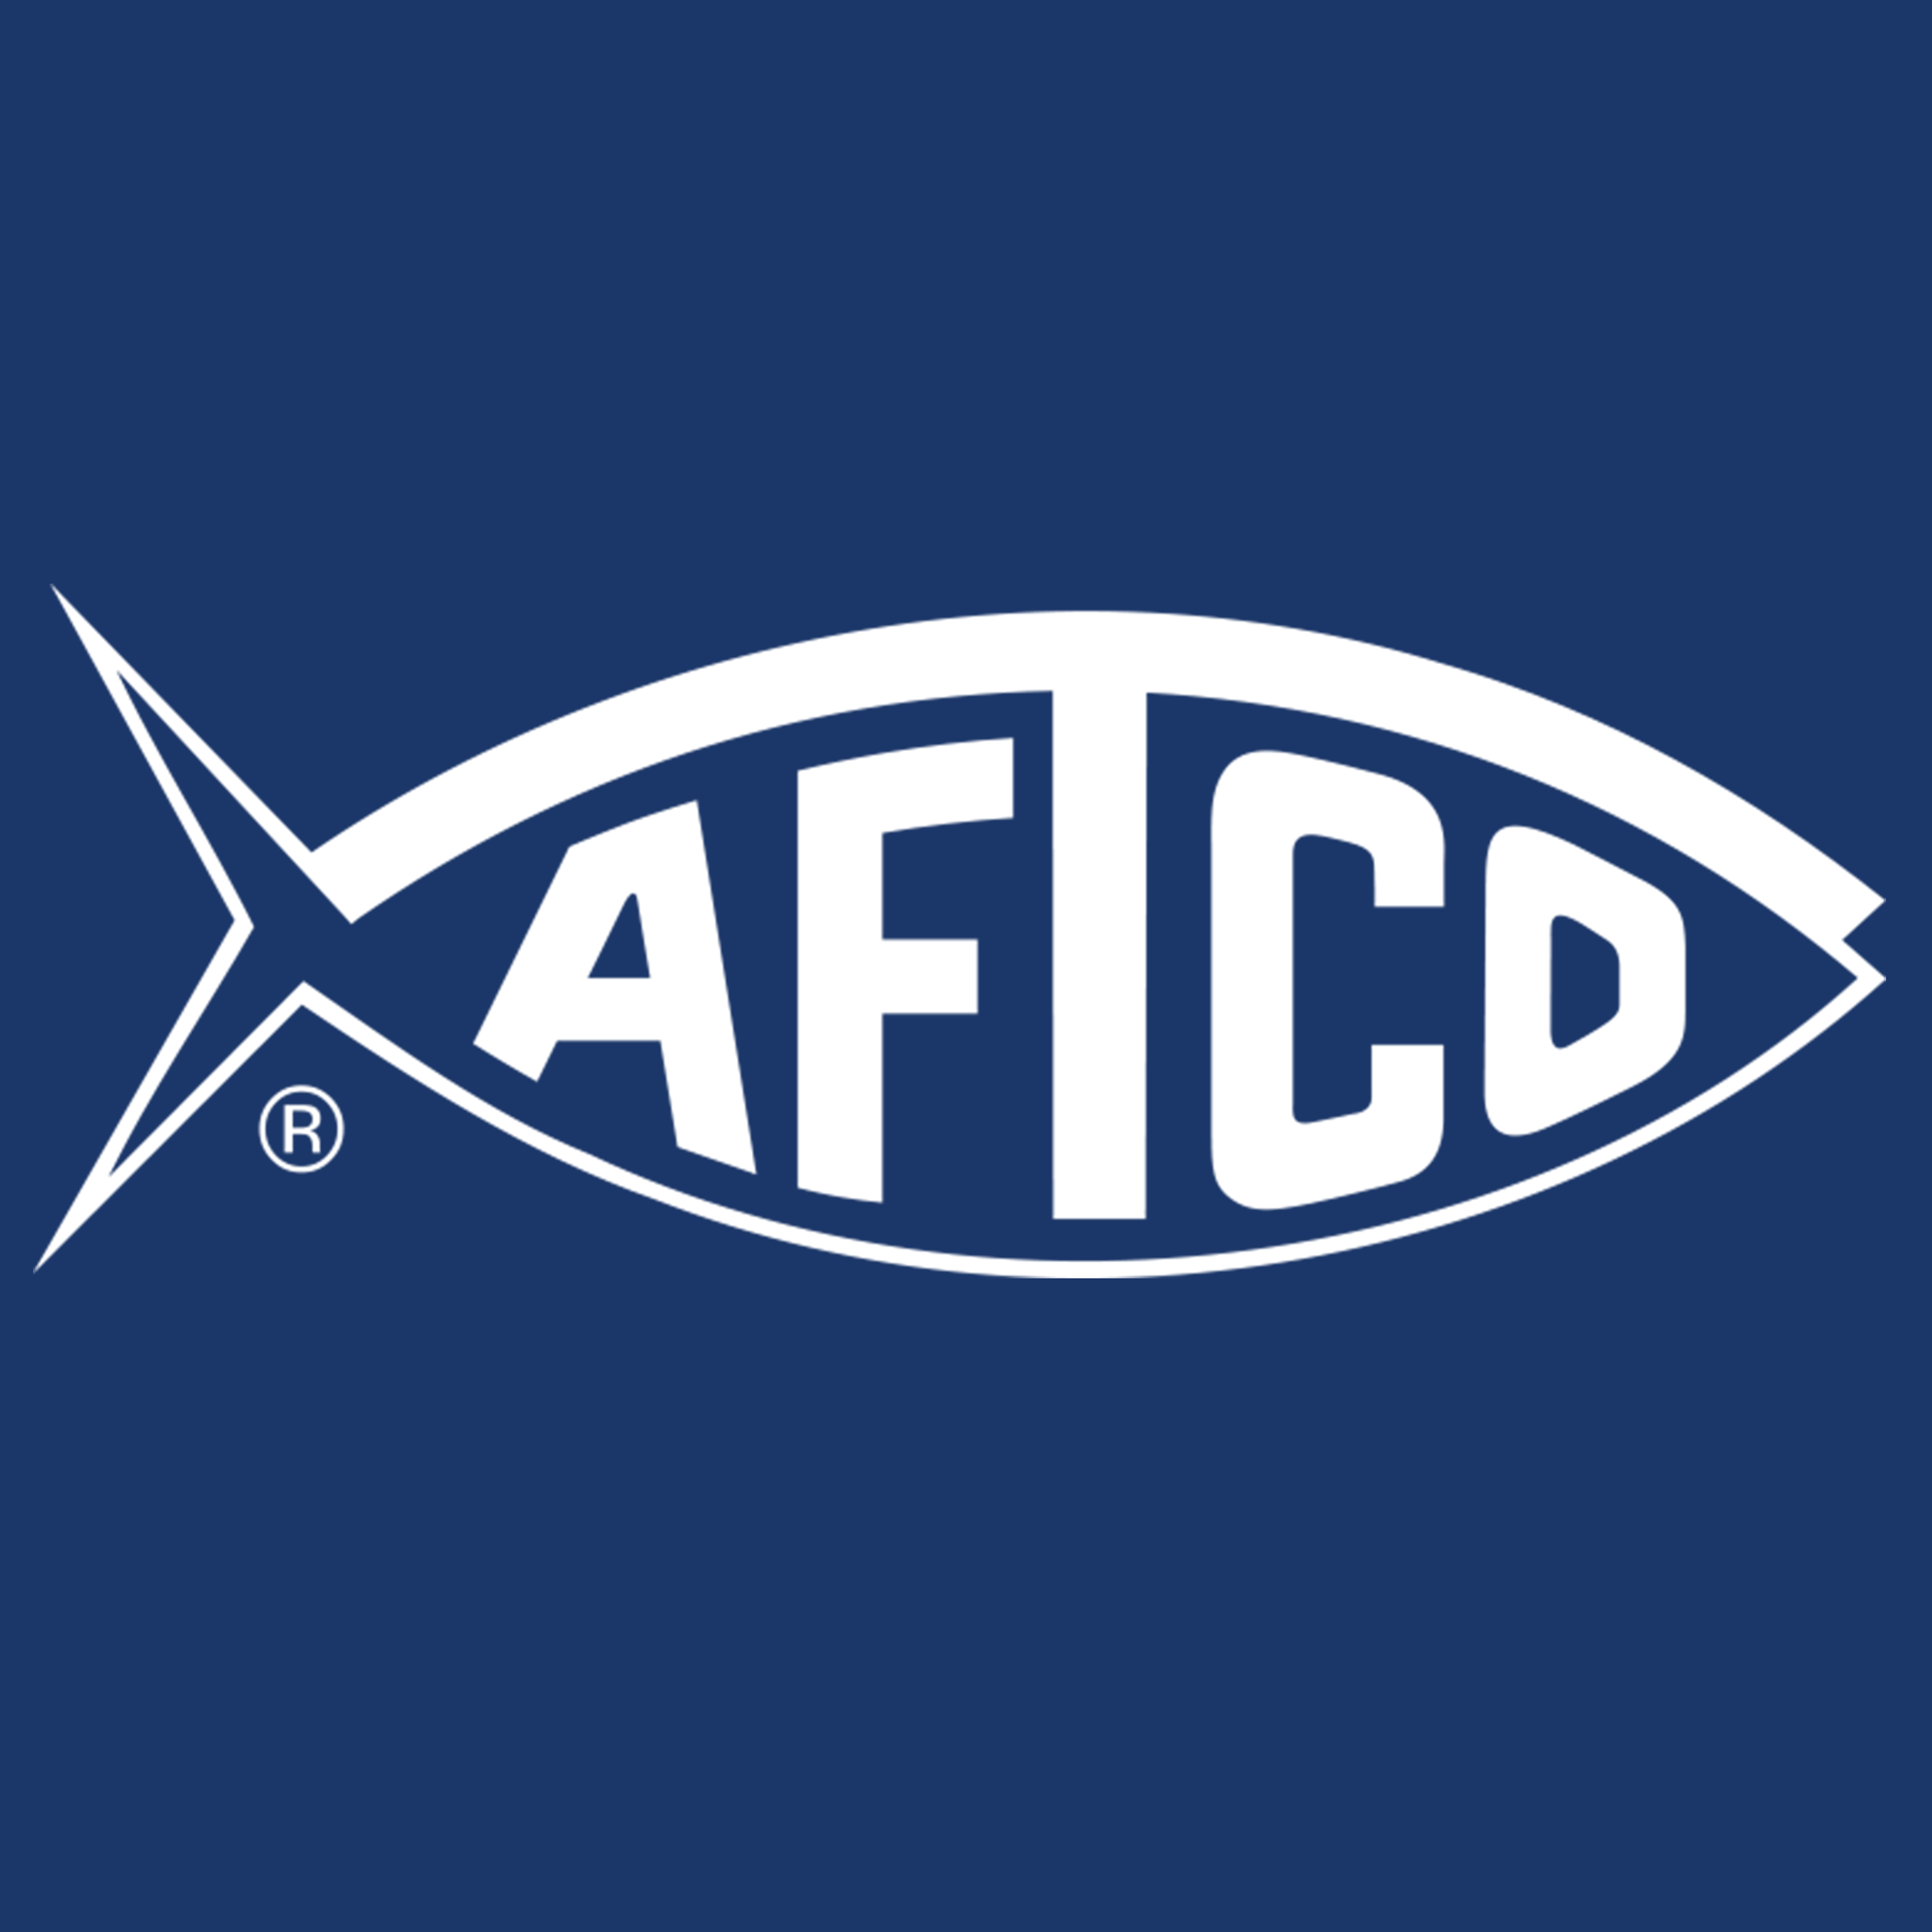 AFTCO coupons and promo codes